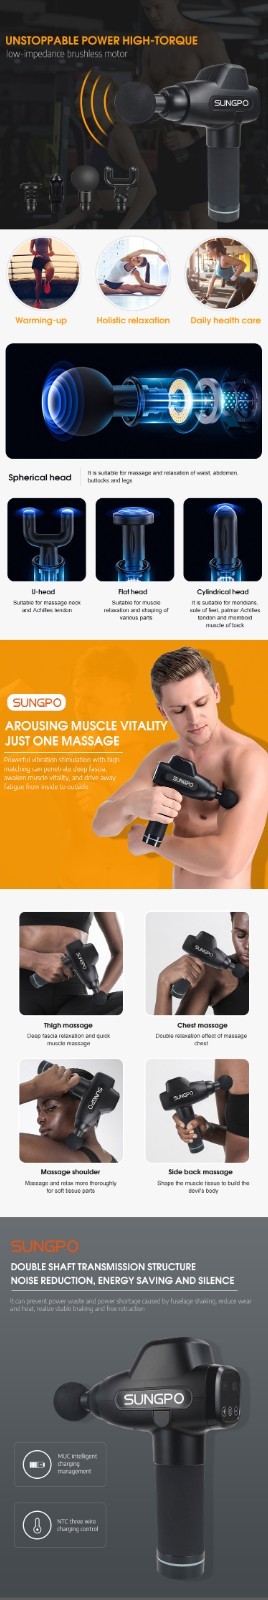 SUNGPO popular power massagers with good price for exercise